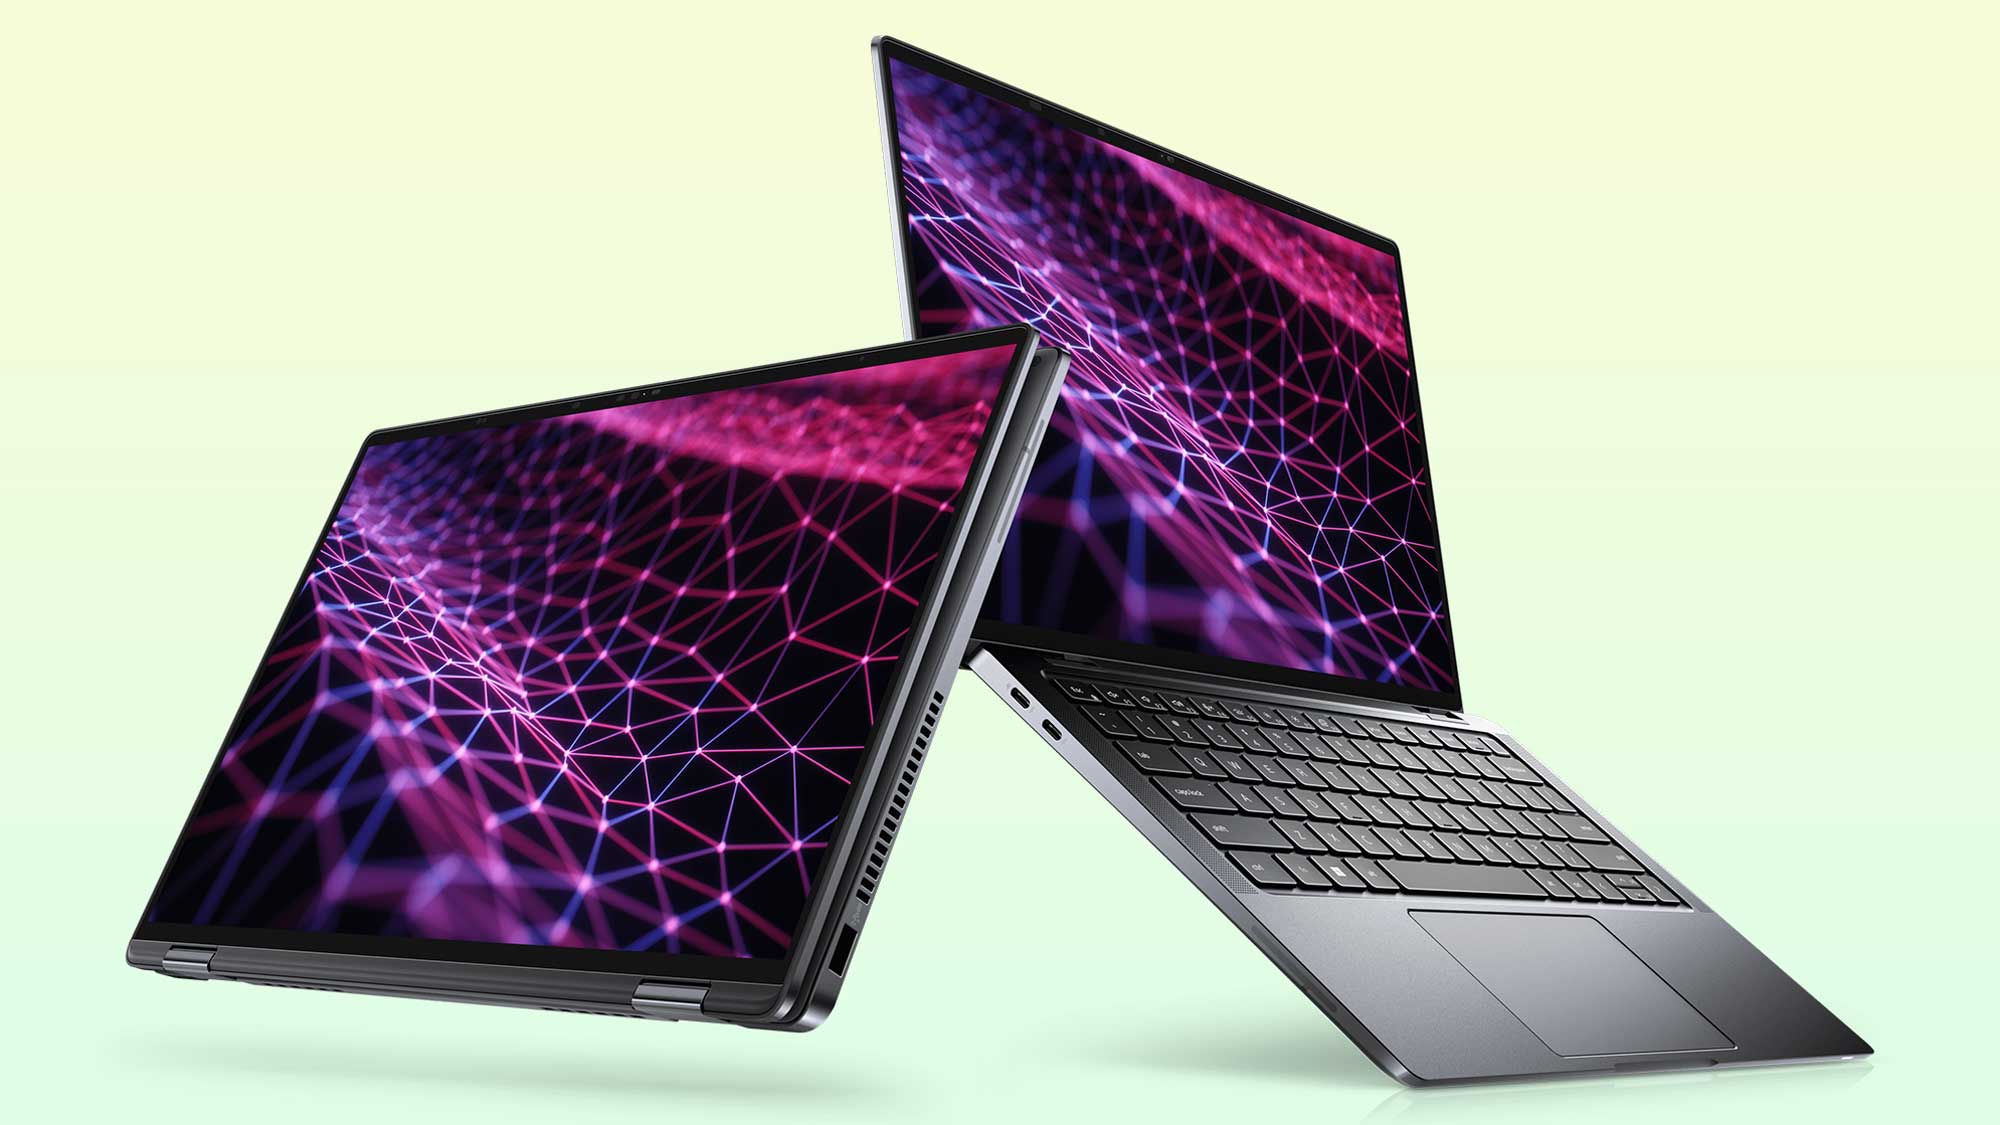 The Dell Latitude 9330 works as a laptop and tablet.